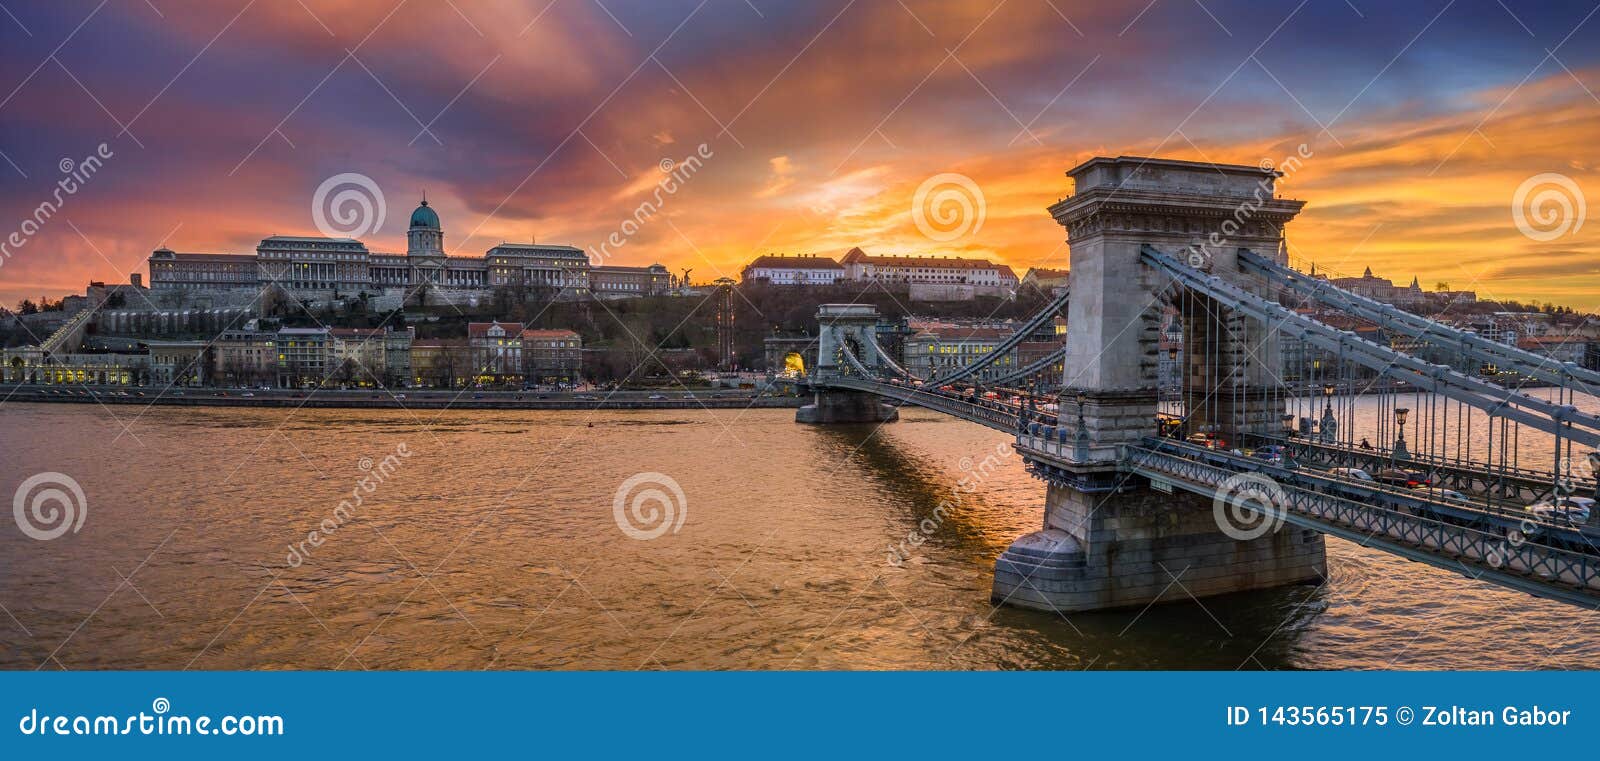 budapest, hungary - aerial panoramic view of szechenyi chain bridge with buda tunnel and buda castle royal palace